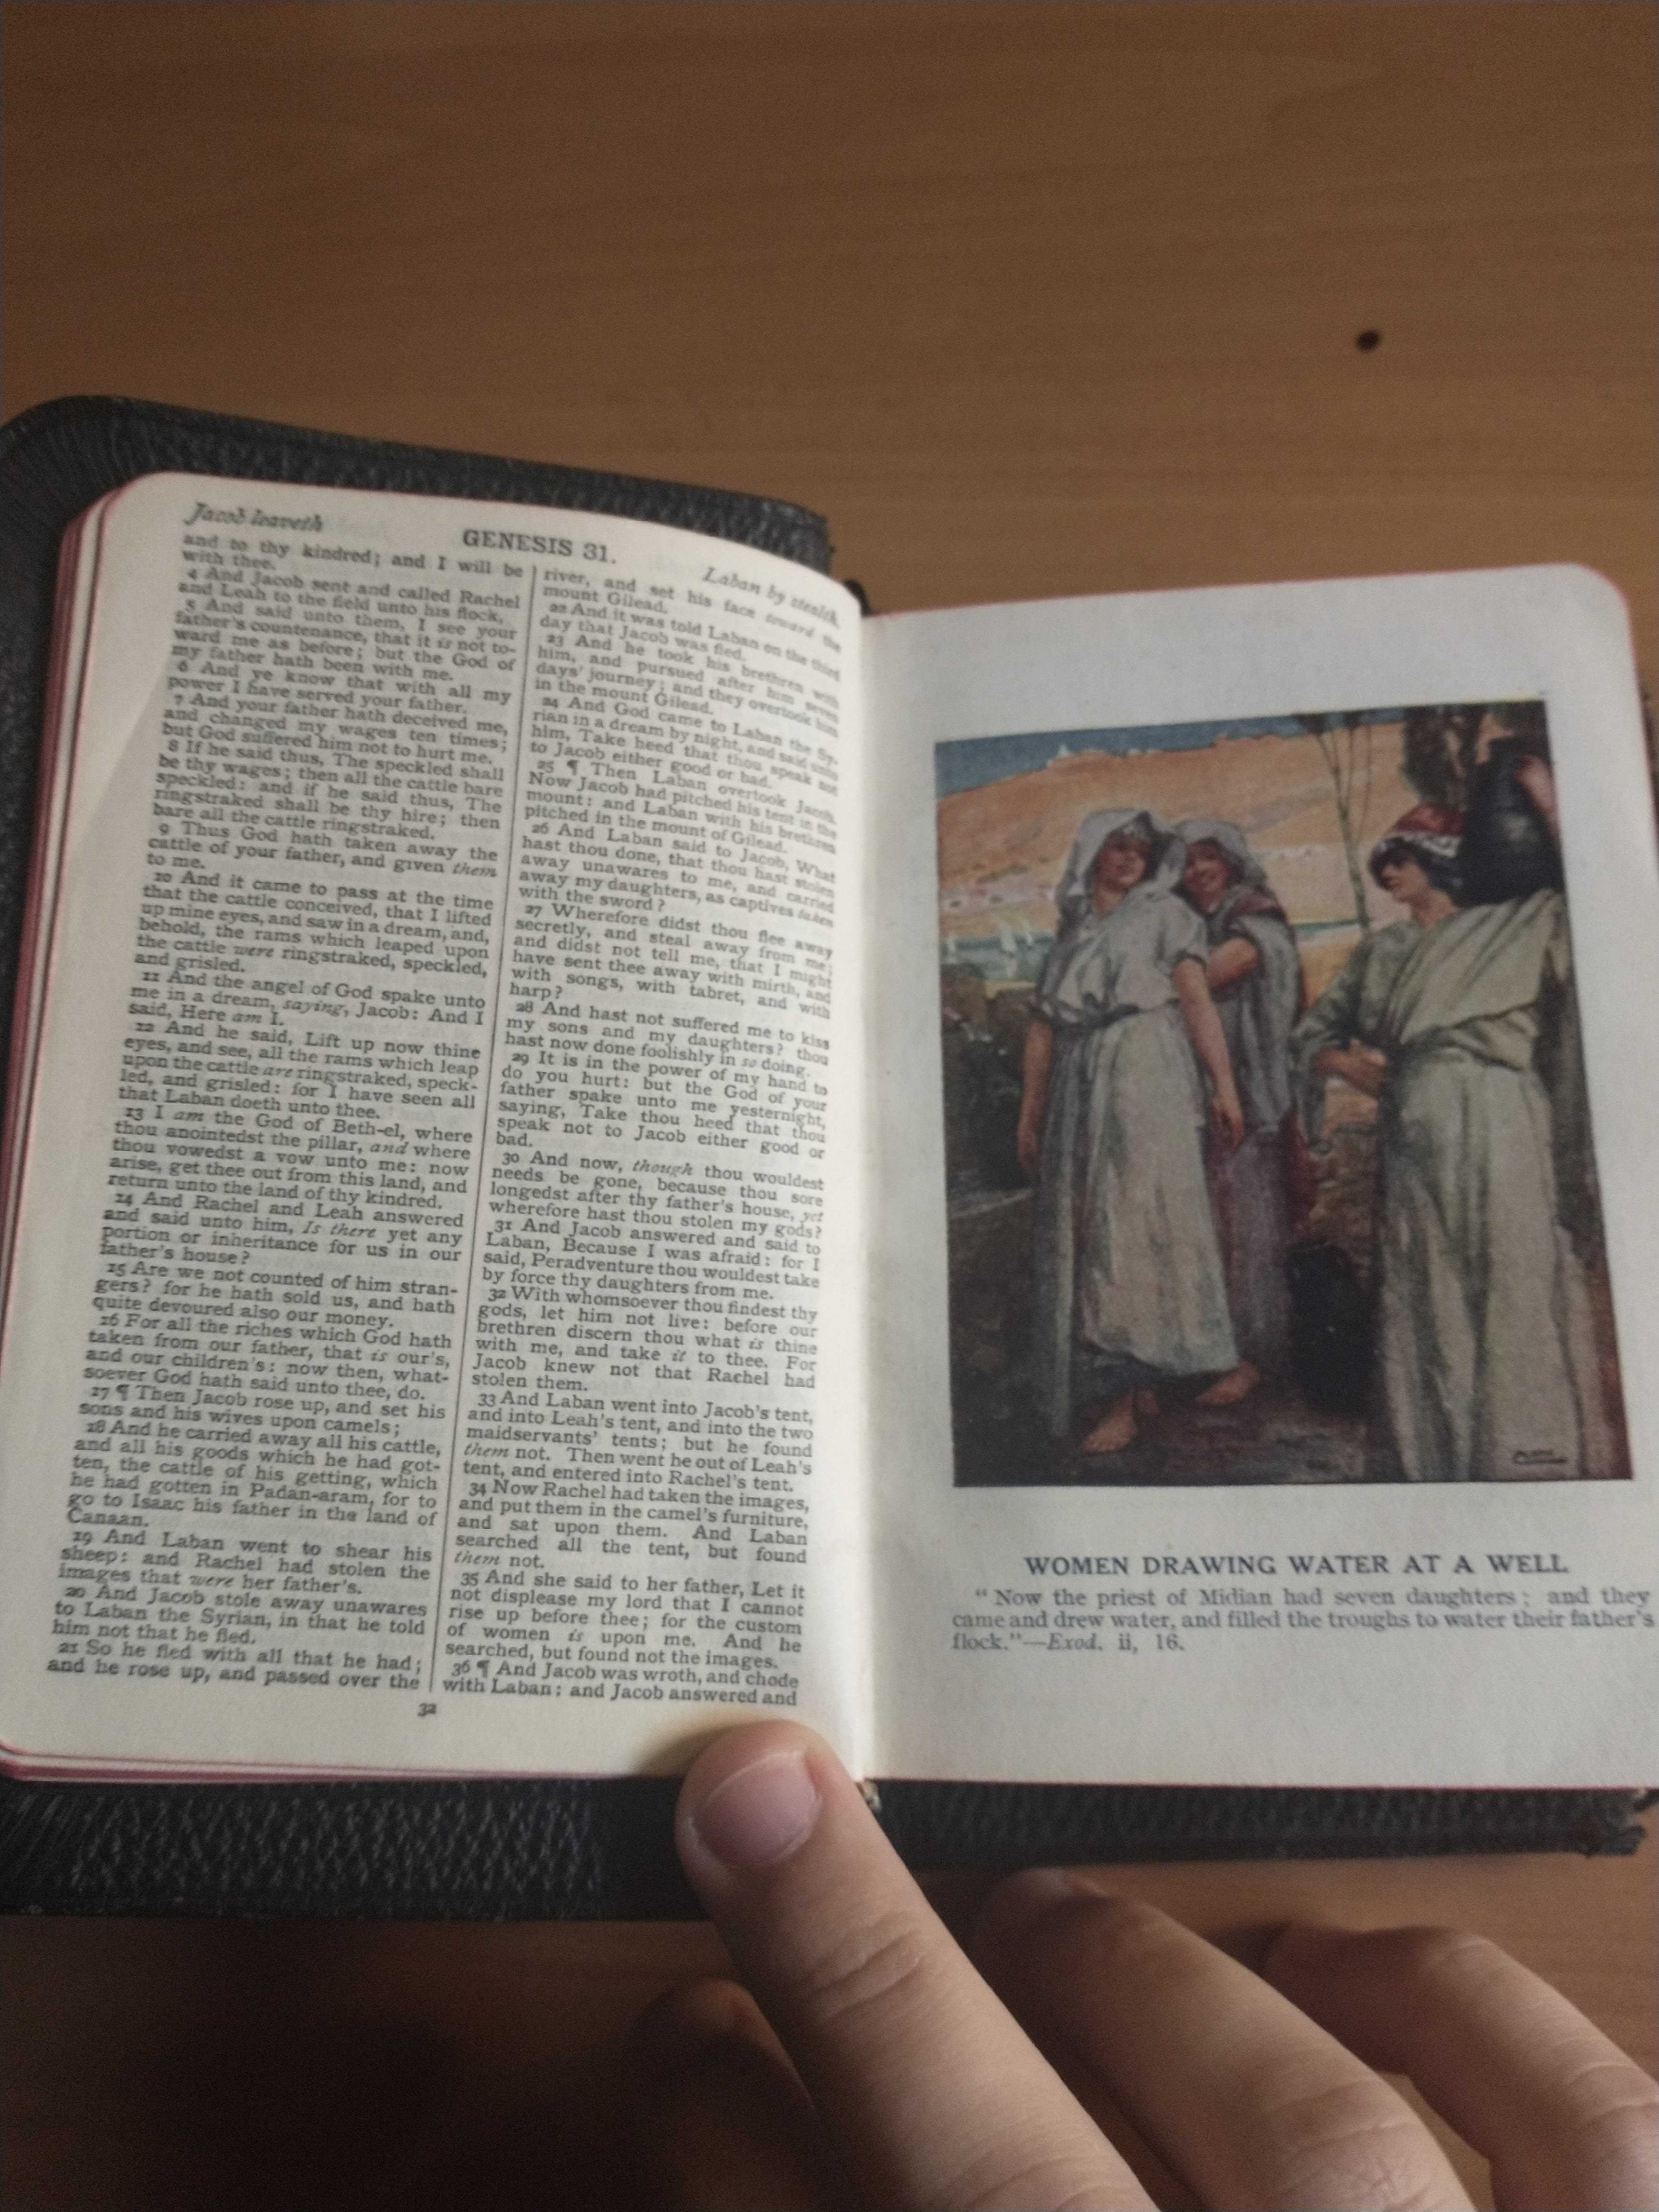 The Bible is open to pages 31 and 32. You can see that the pages have a red outline on their edges. On the left page is Genesis 31, in two columns. The text is very small. On the right page is an illustration titled "Women Drawing Water At A Well". It is in the same style as the previous illustration. It depicts three women it loose white robes, smiling and carrying water. There are plants around them. In the background appears to be a small pond, and a desert hill.